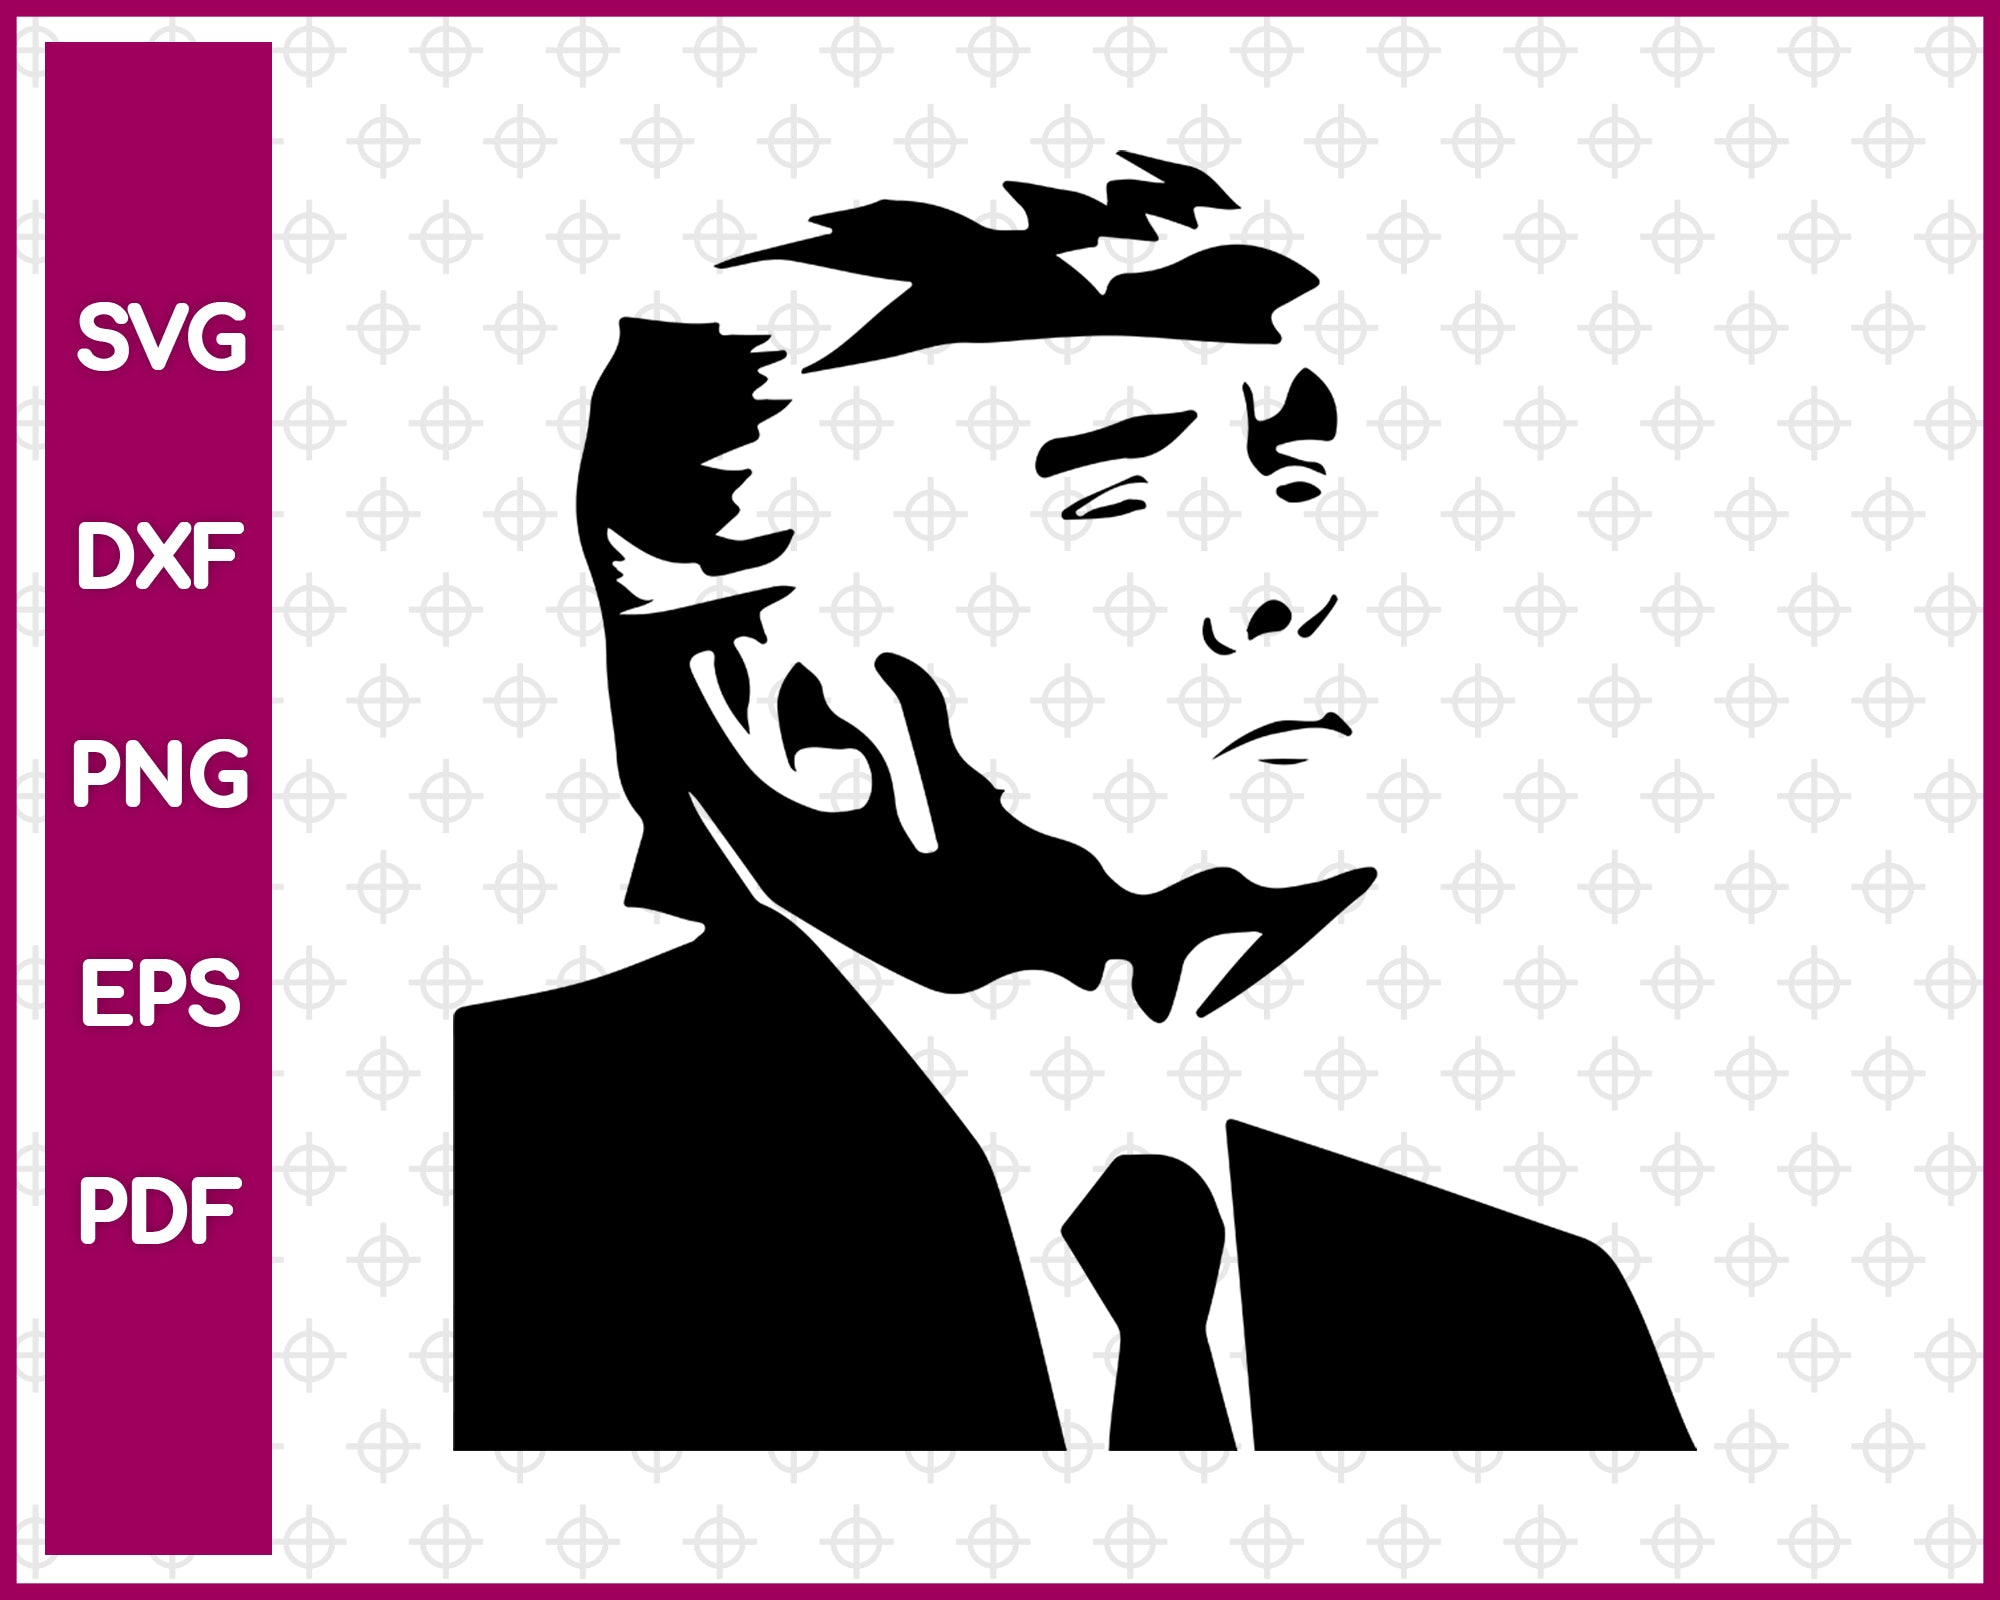 Donald Trump svg file, President United States svg dxf png eps pdf, vector decal for cricut clipart, silhouette vinyl sticker monogram, shirt